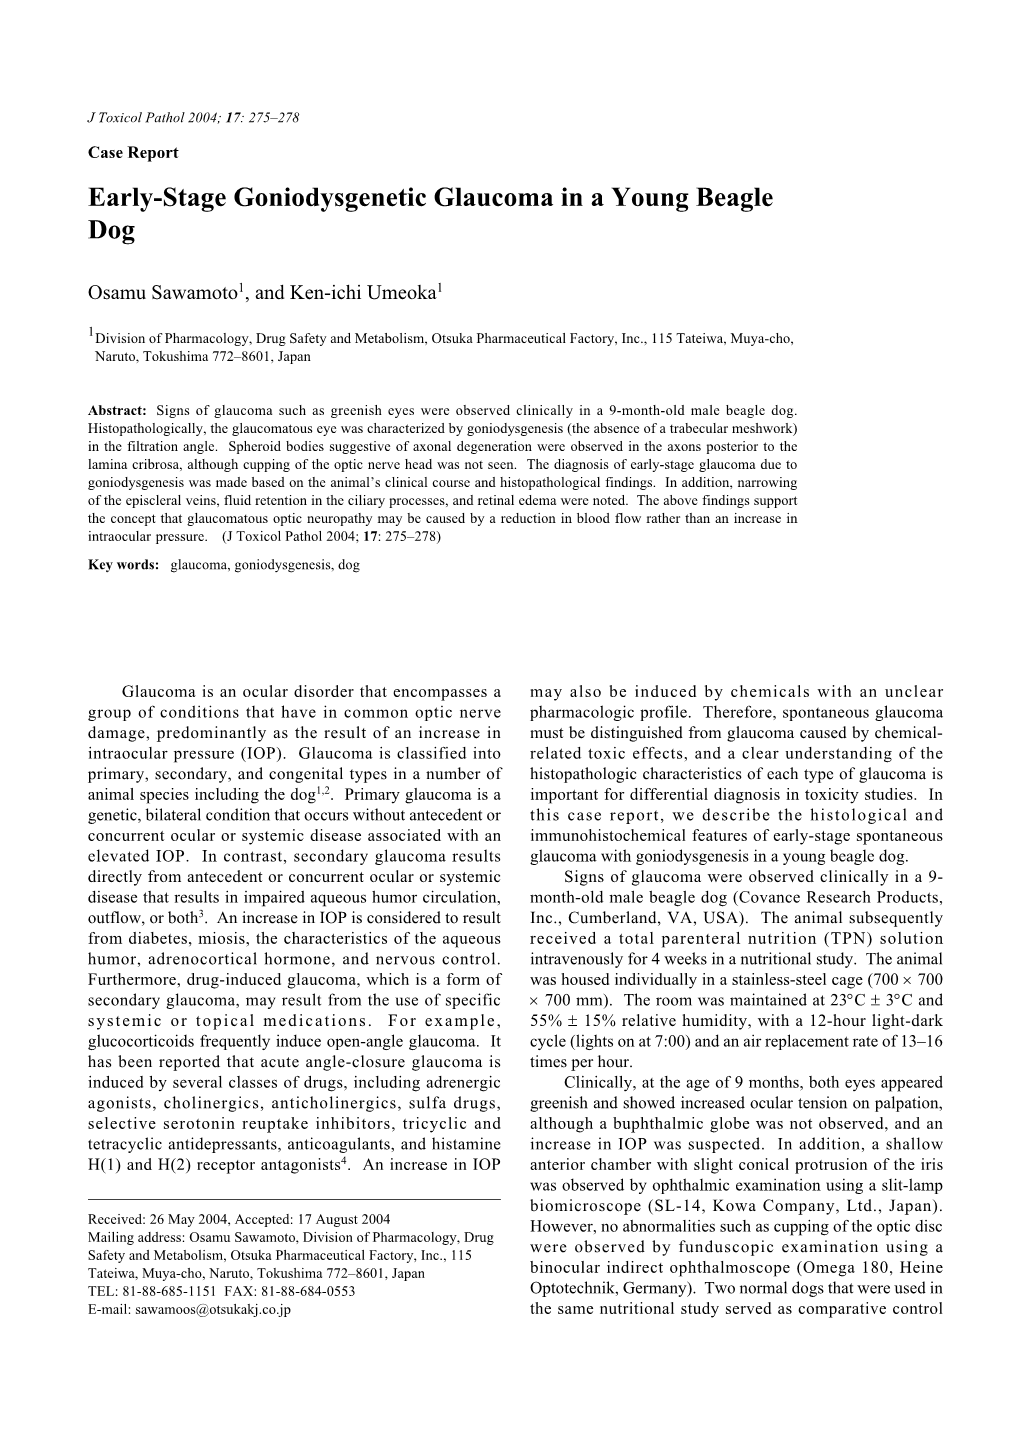 Early-Stage Goniodysgenetic Glaucoma in a Young Beagle Dog